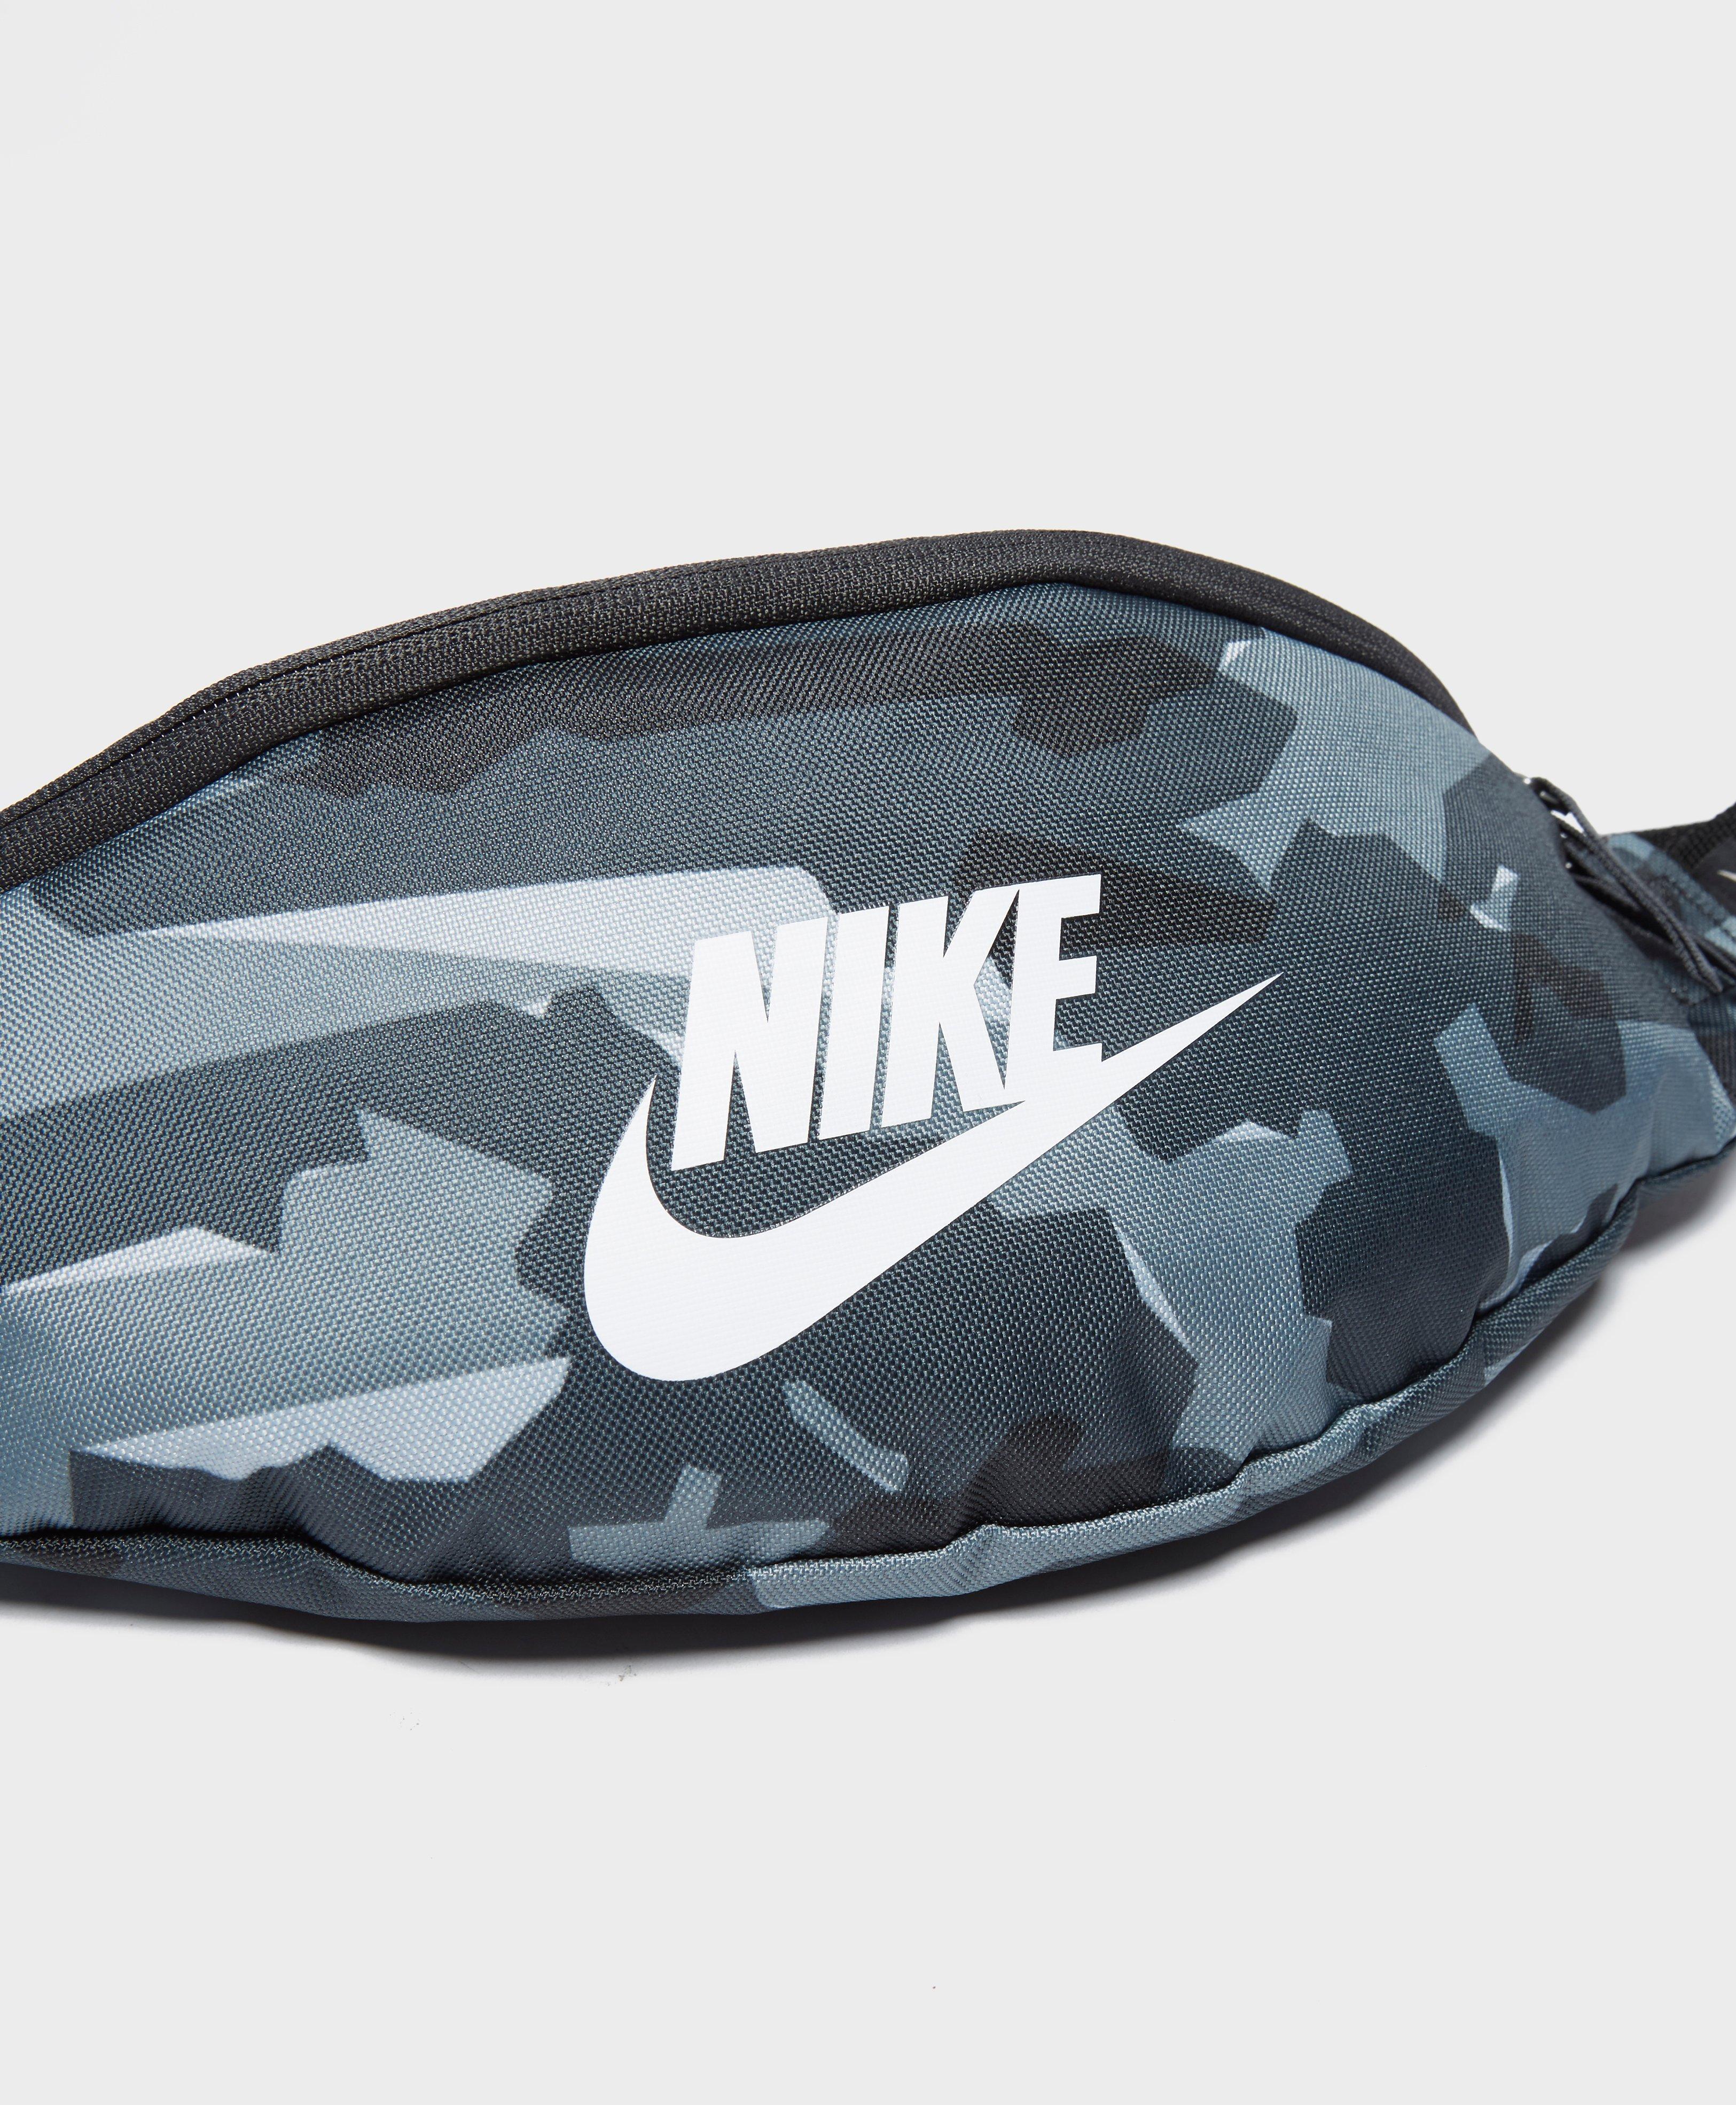 Nike Synthetic Camo Bum Bag in Blue for Men - Lyst